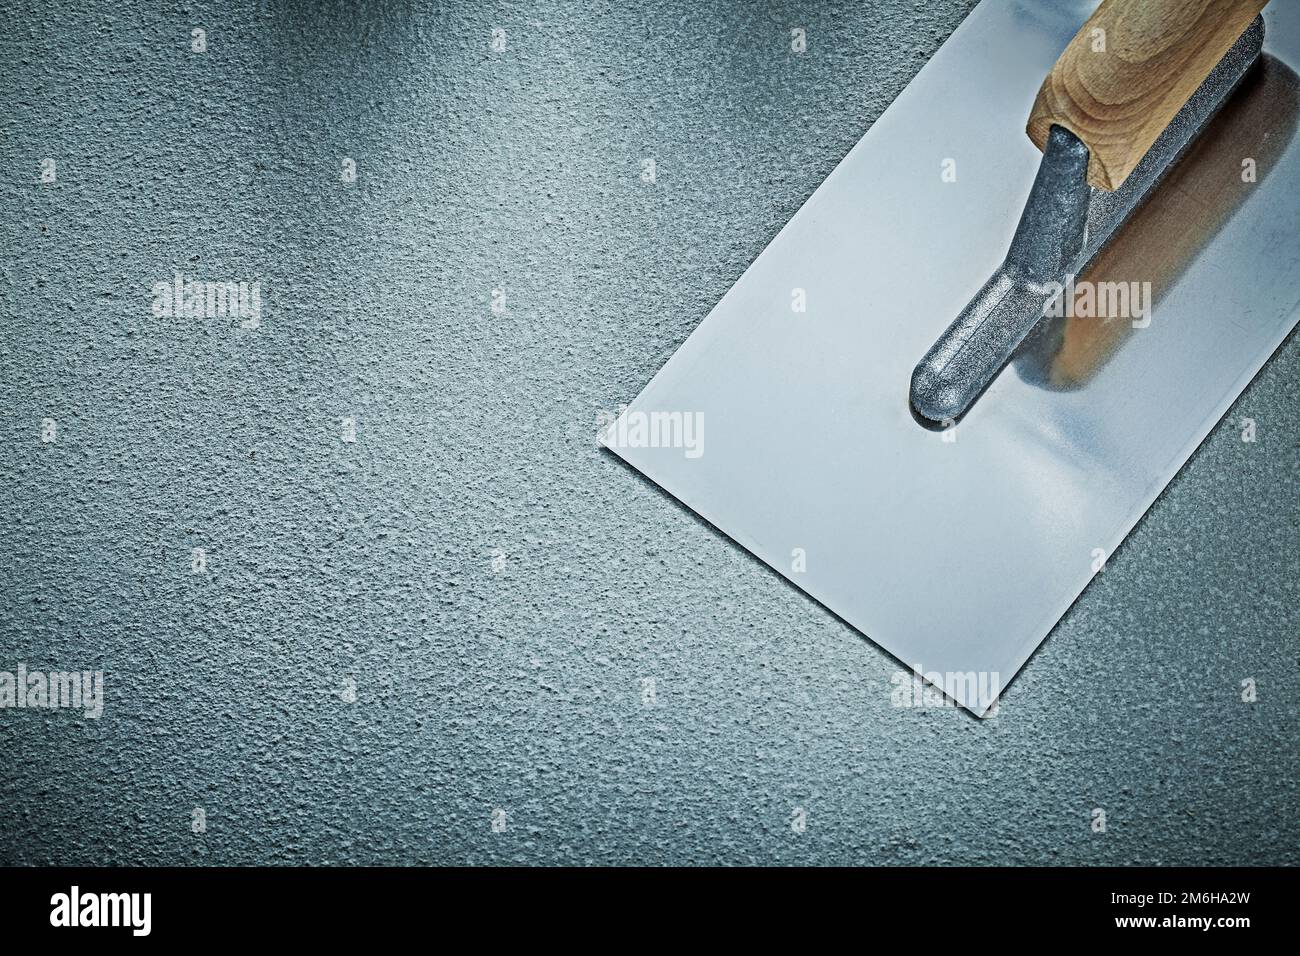 Stainless plastering trowel on concrete background construction concept. Stock Photo